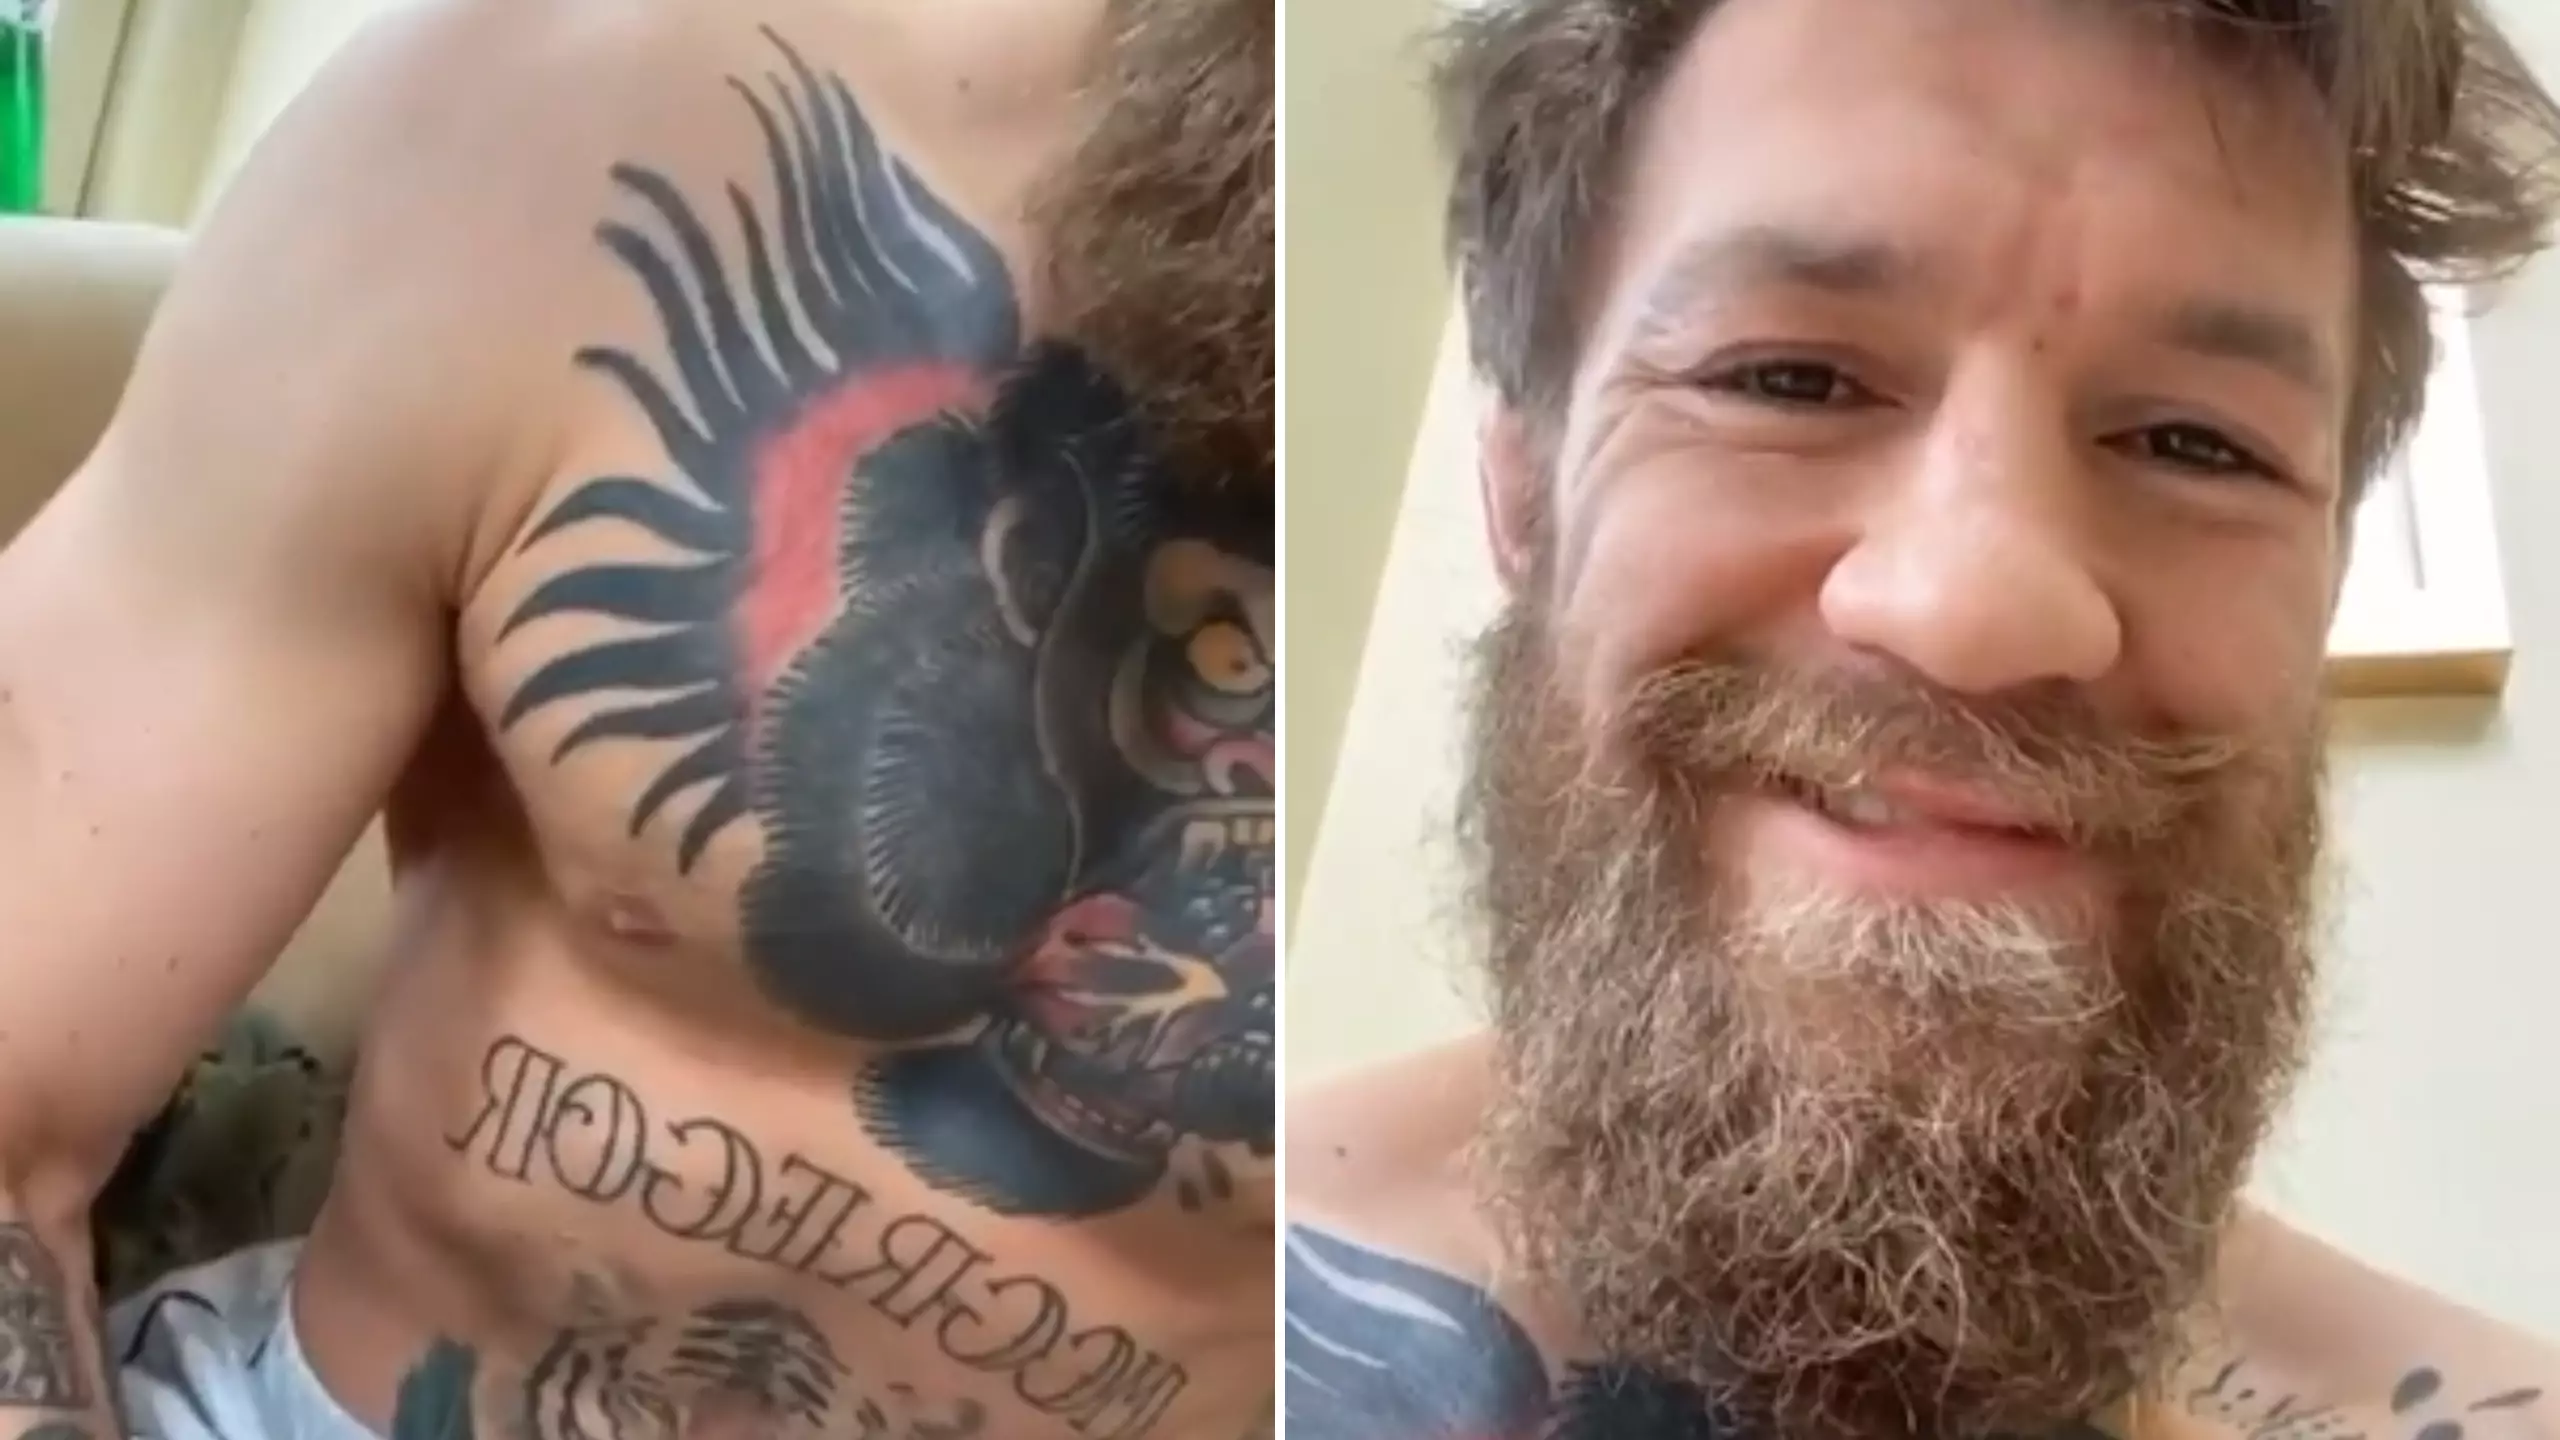 Conor McGregor Shows Off His Incredible Physique After Claims He's 'Fit To Fight' At UFC 249